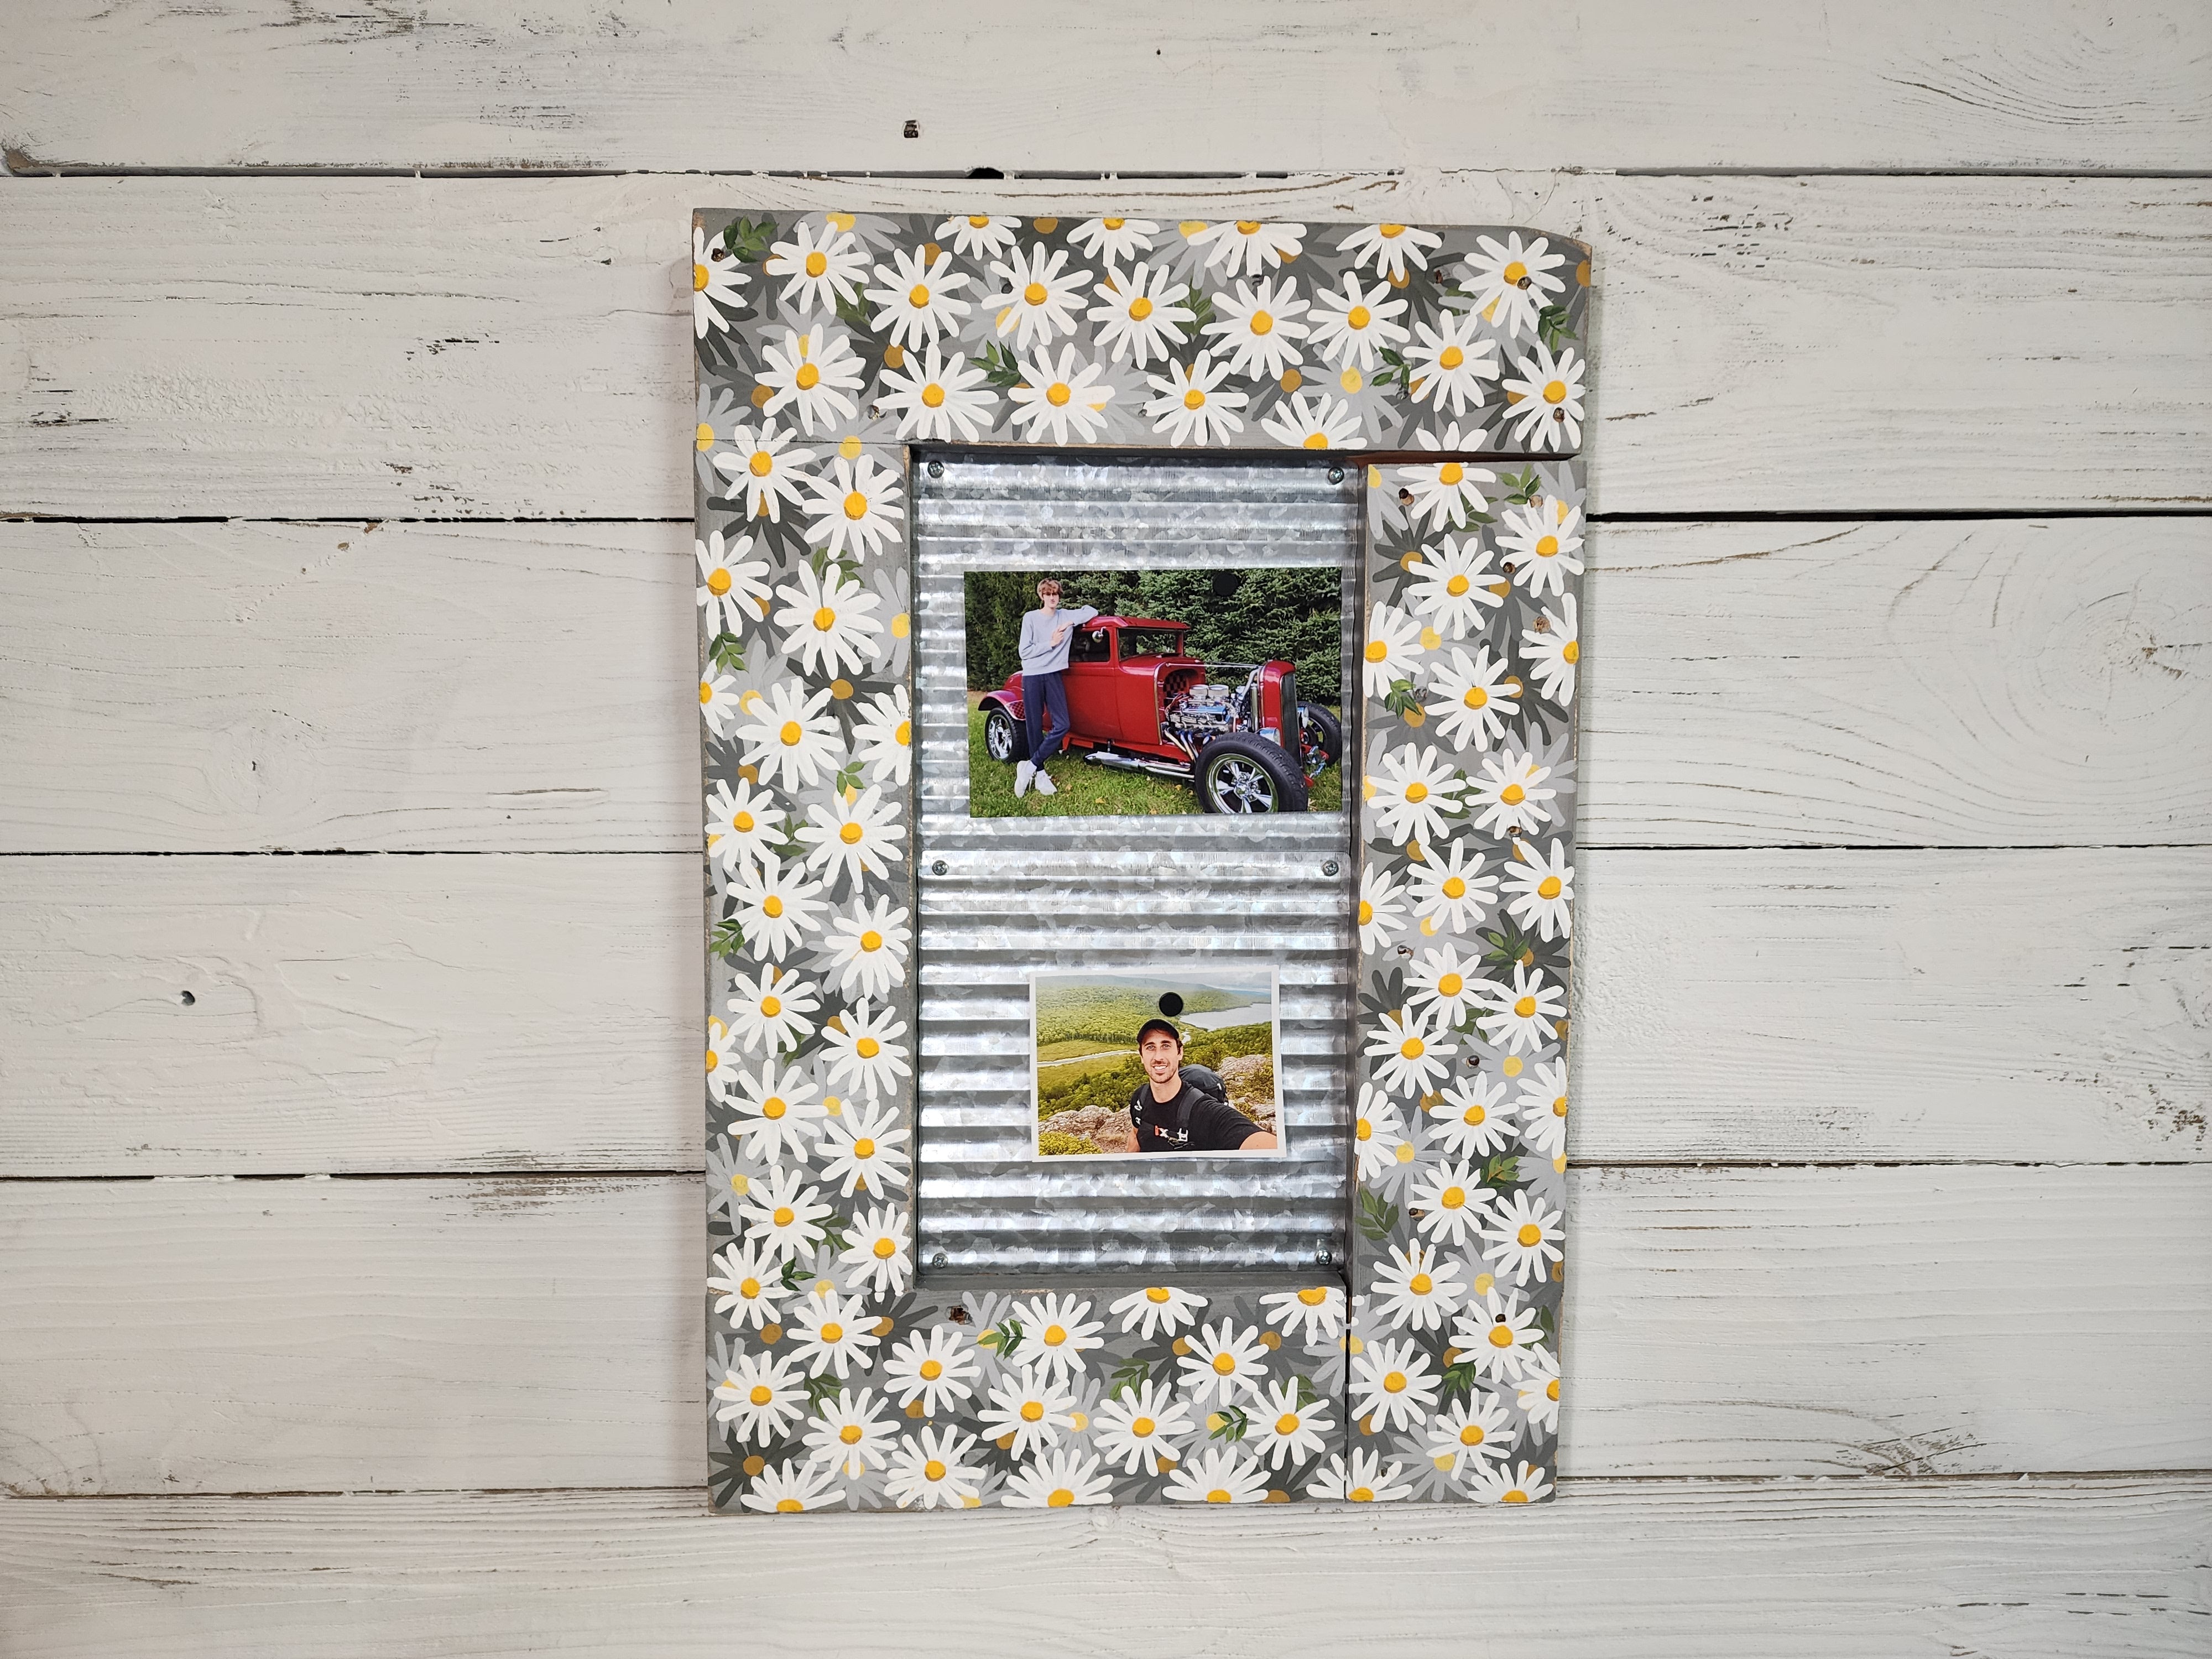 Grey Daisy Handpainted Acrylic floral frame, grey farmhouse summer decor, pallet wood, photo display, corrugated steel for magnet photos